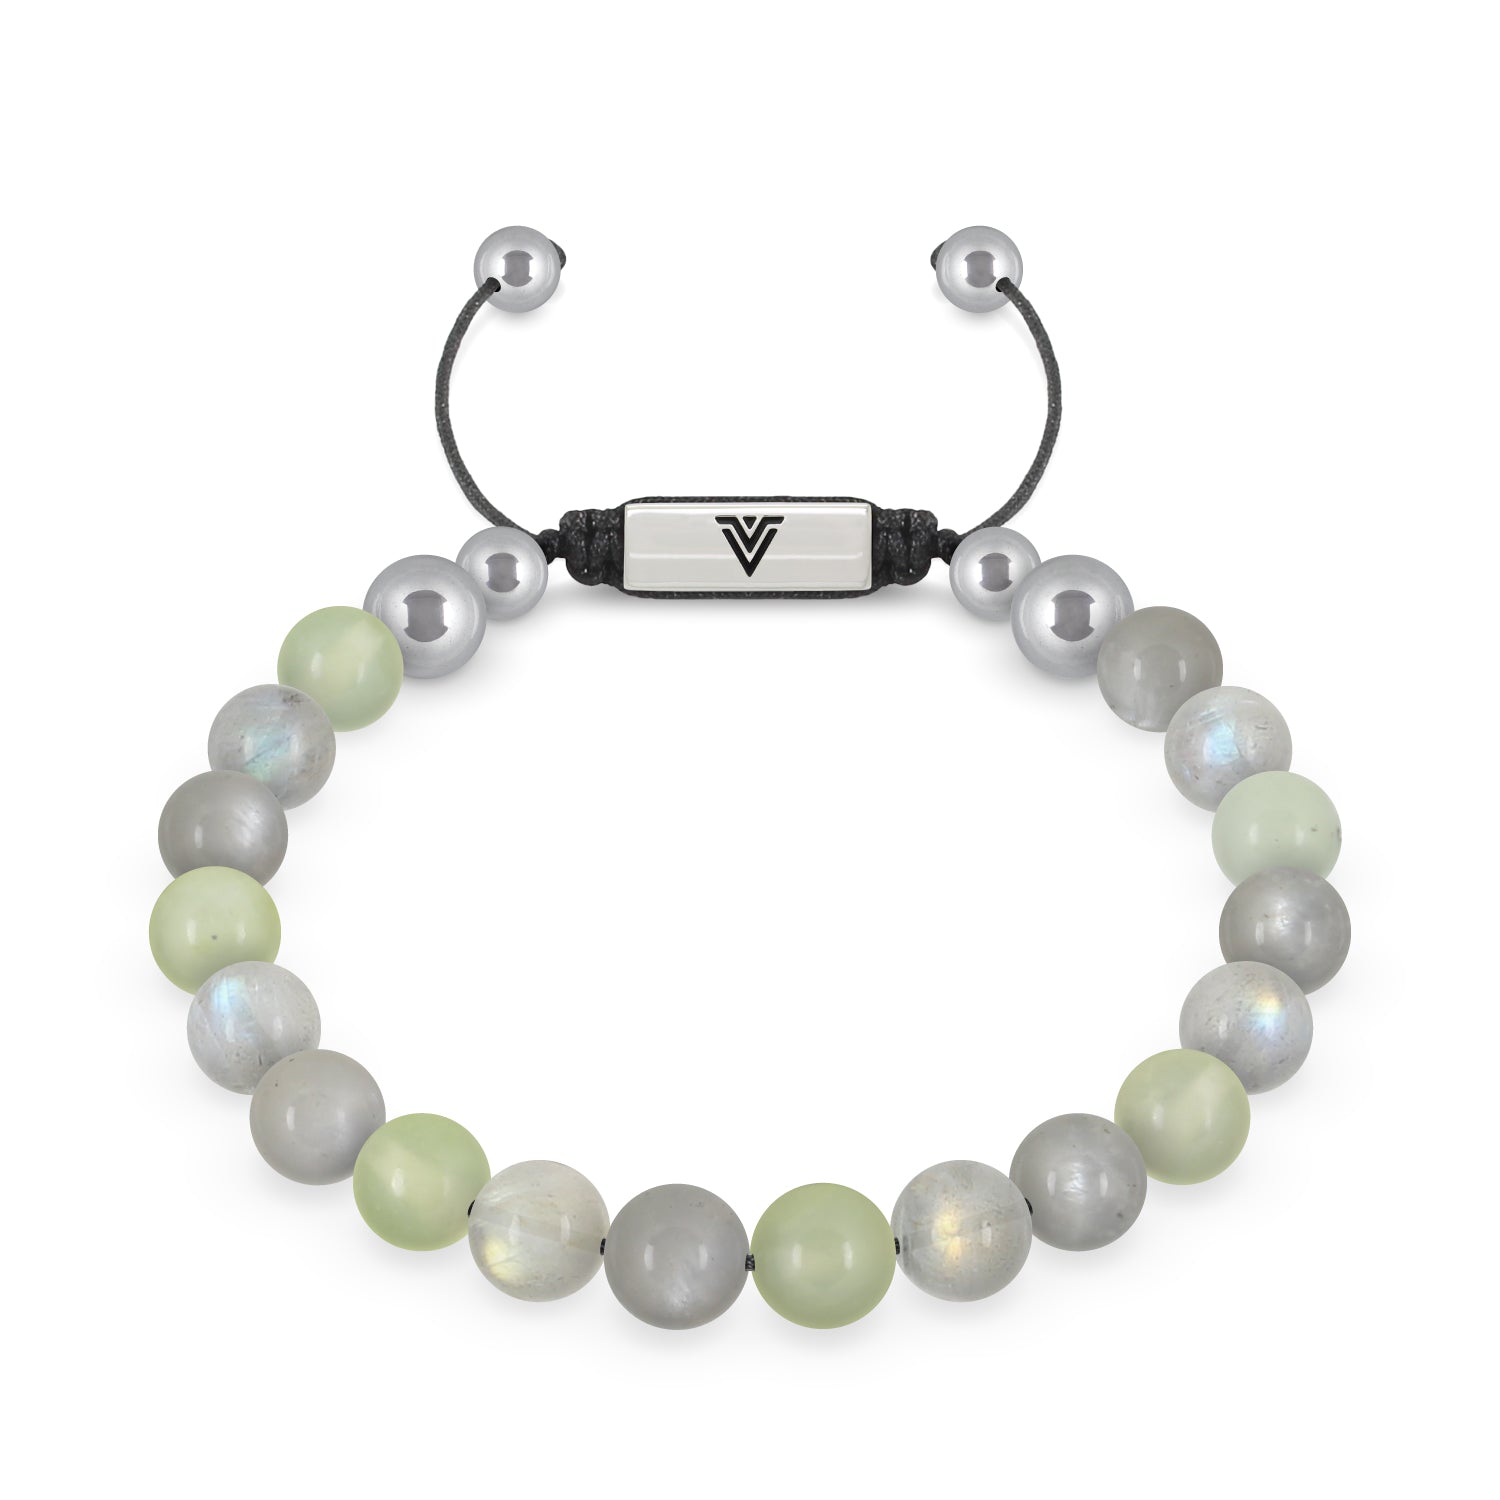 Front view of an 8mm Pisces Zodiac beaded shamballa bracelet featuring Jade, Labradorite, & Moonstone crystal and silver stainless steel logo bead made by Voltlin